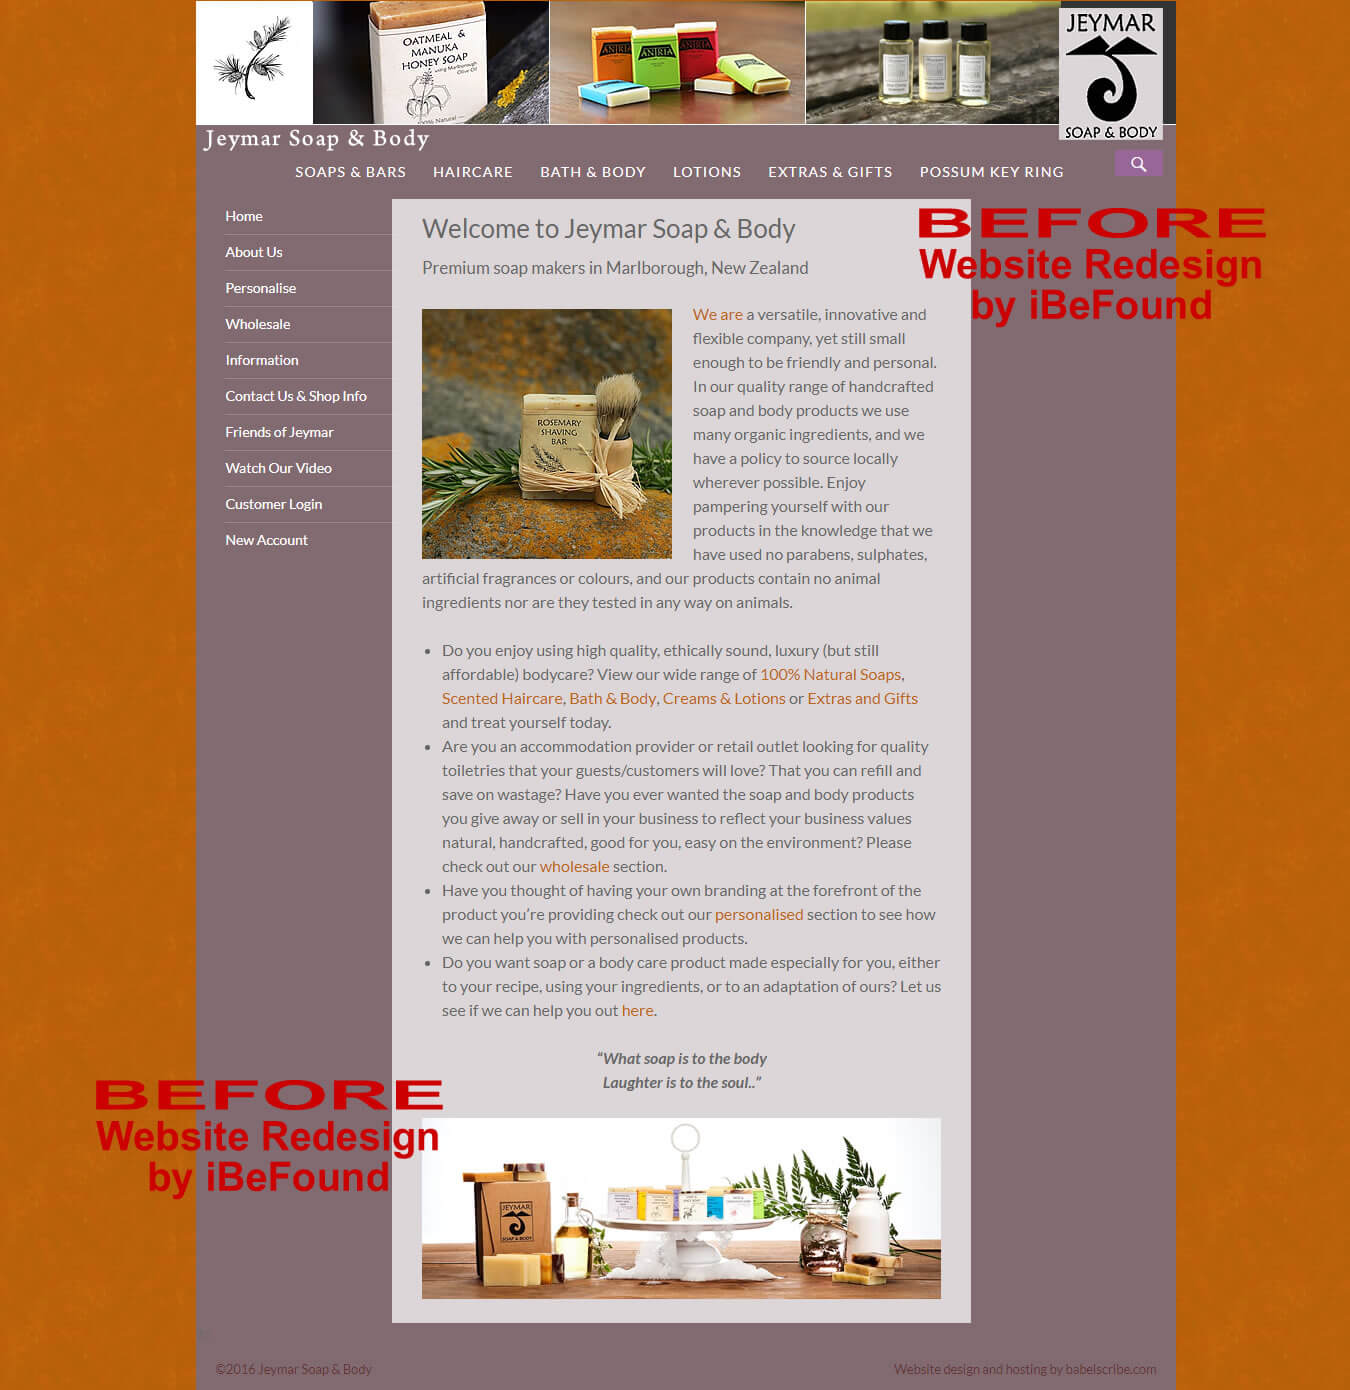 Homepage Of Jeymar Soap And Body Before Website Redesign By IBeFound